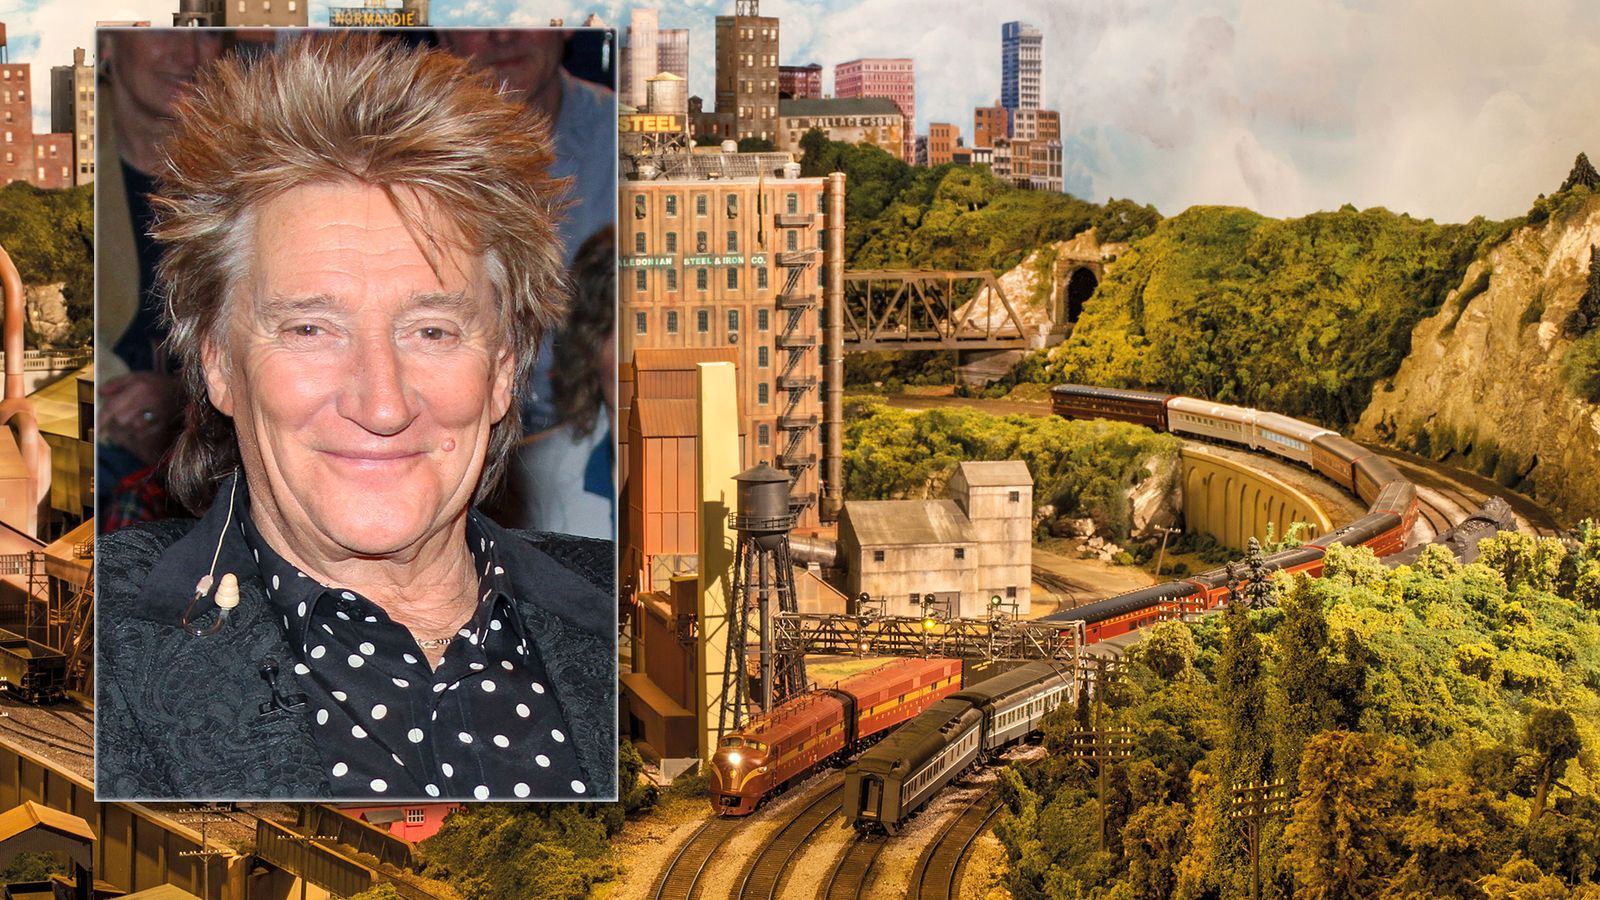 Sir Rod Stewart unveils model railway he worked on for 25 years | Ents   Arts News | Sky News